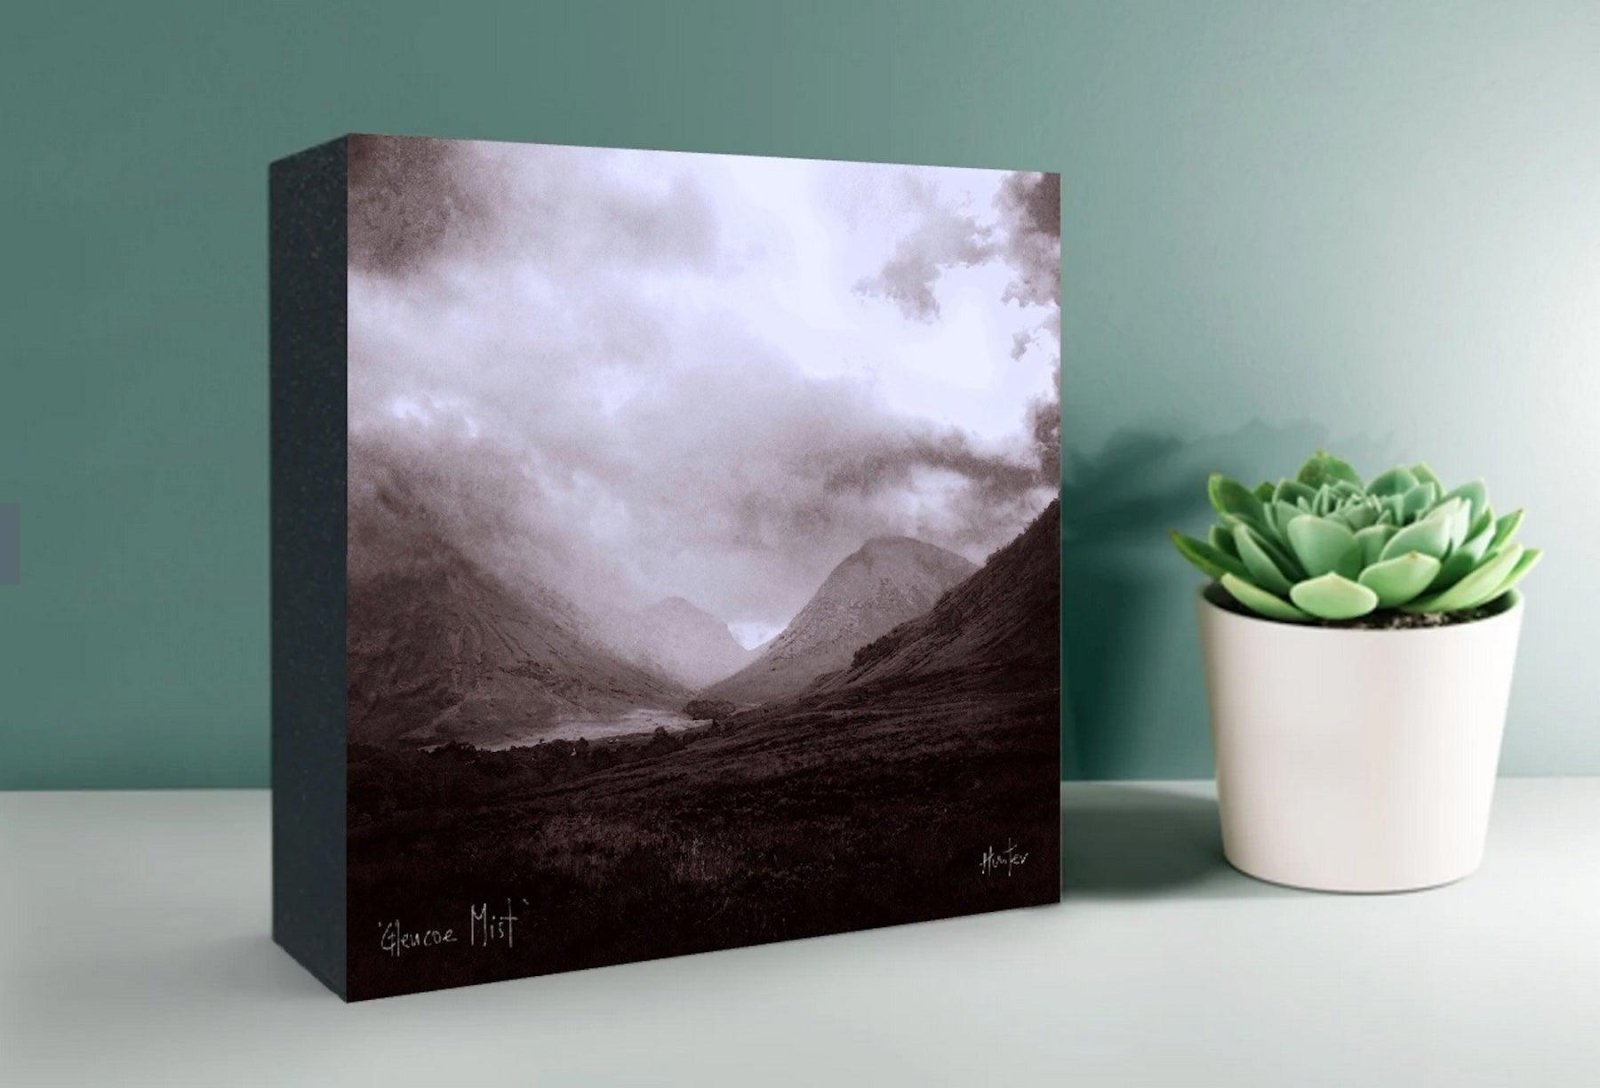 The Moonlit Mountain Stag Wooden Art Block-Wooden Art Blocks-Scottish Highlands & Lowlands Art Gallery-Paintings, Prints, Homeware, Art Gifts From Scotland By Scottish Artist Kevin Hunter